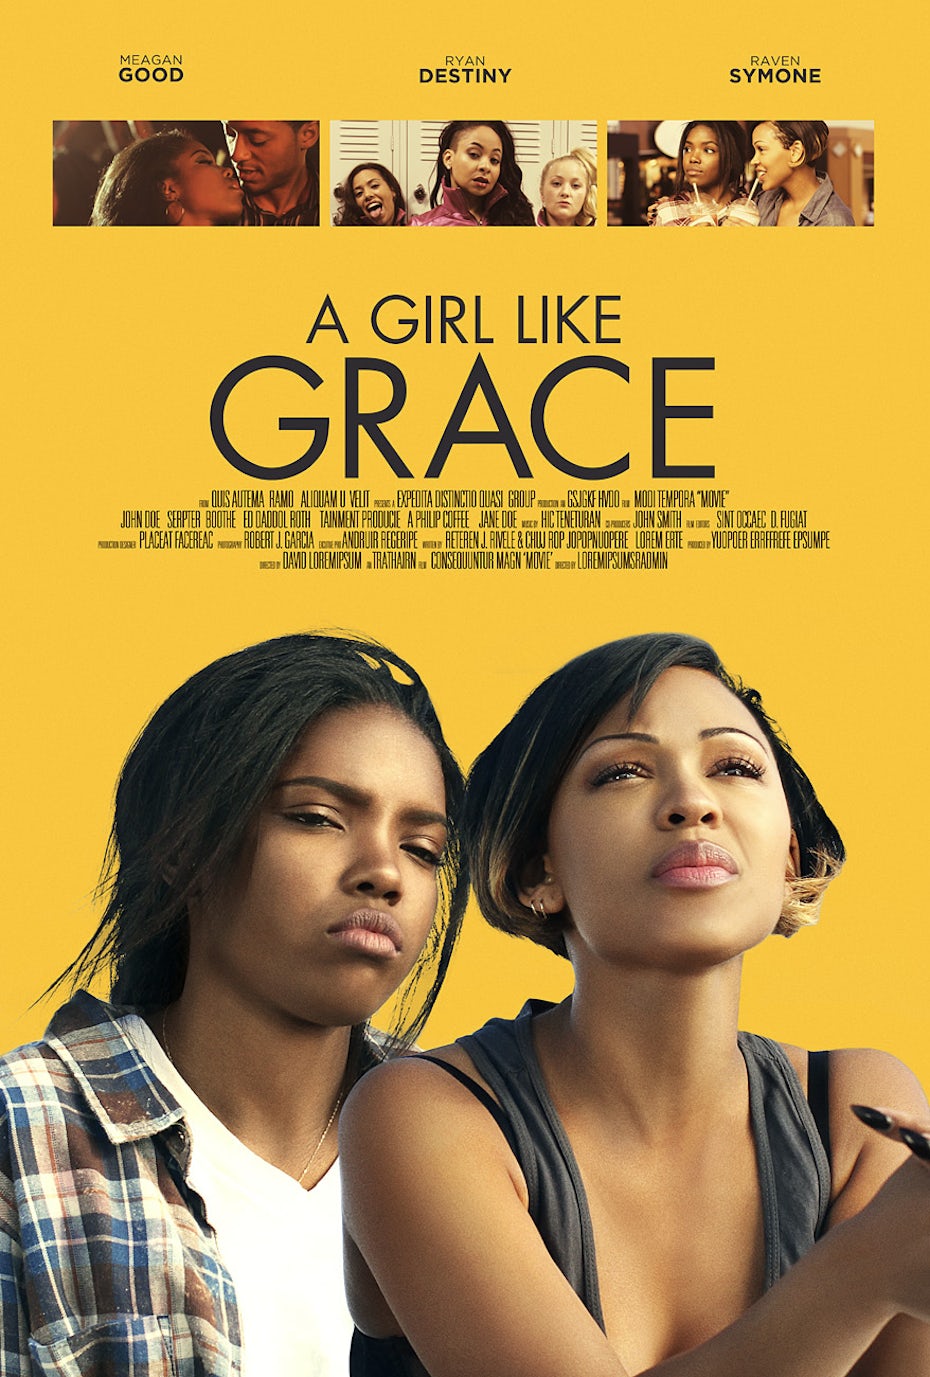 yellow movie poster showing two young women, one looking upward and one looking down